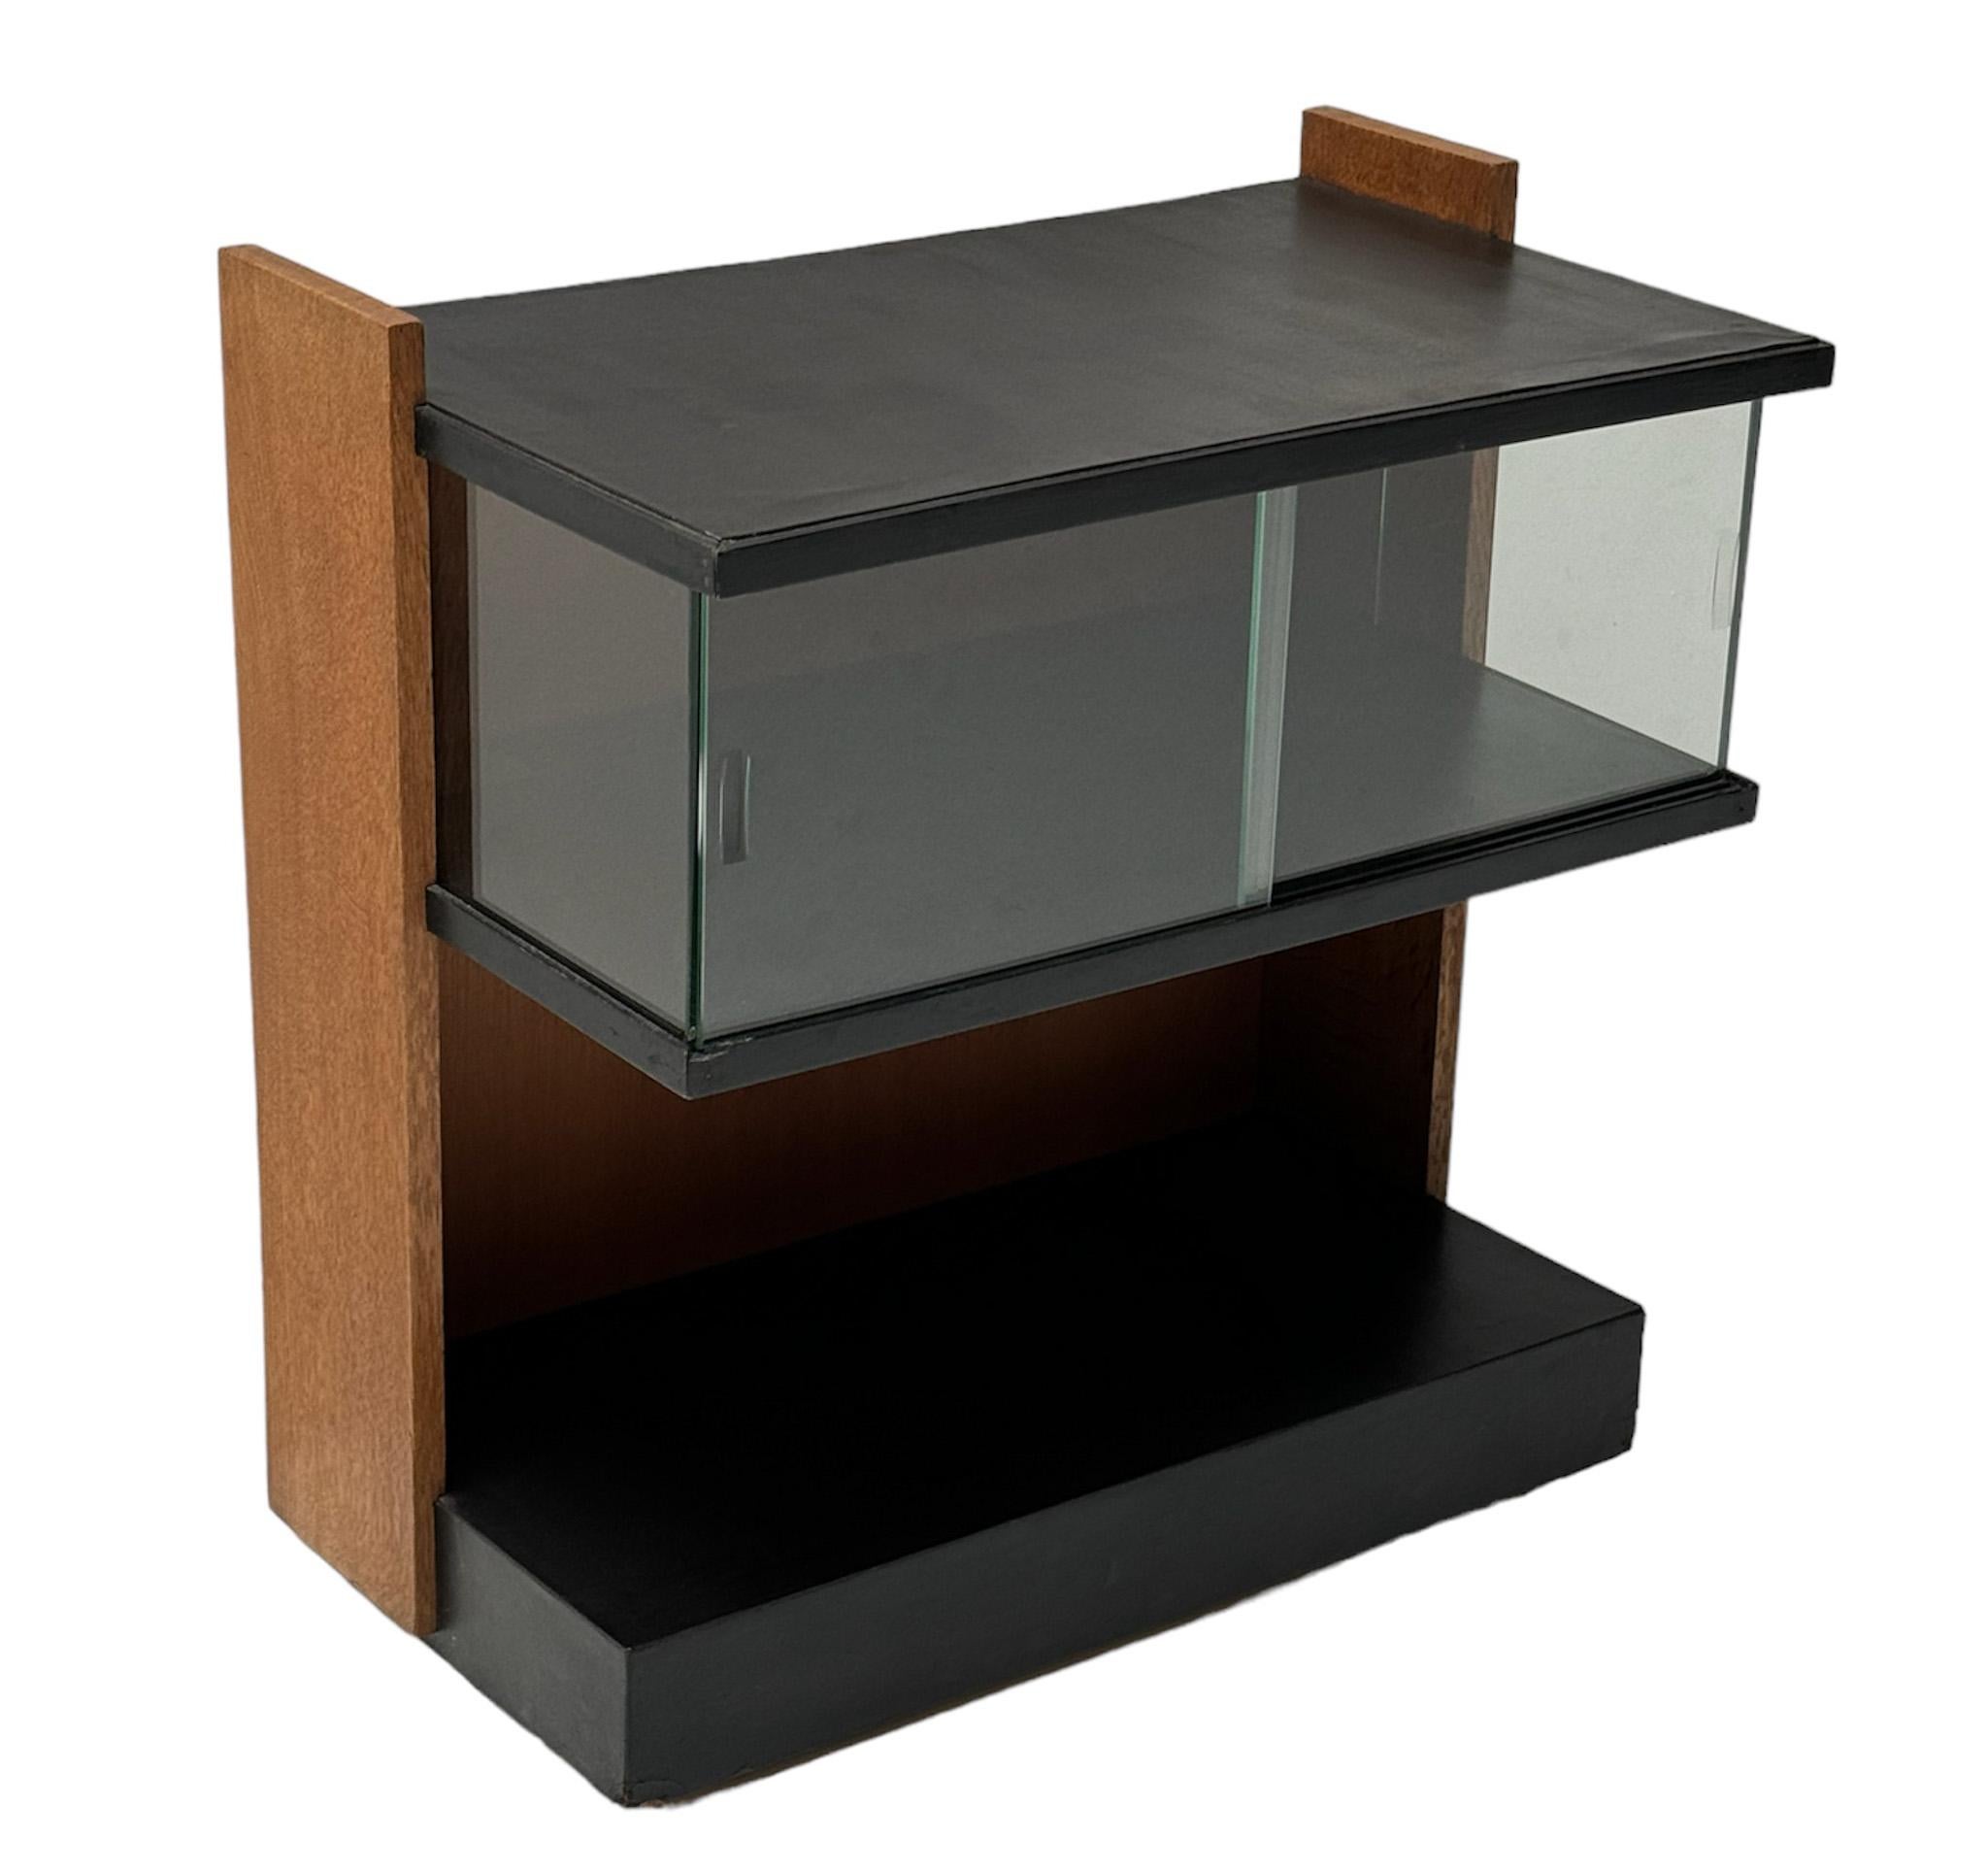 Magnificent and ultra rare Art Deco Modernist cabinet.
Design by Jan den Drijver for De Stijl Den Haag.
Striking Dutch design from the 1920s.
Original solid oak base with original black lacquered linoleum top.
Two glass sliding doors.
Marked with